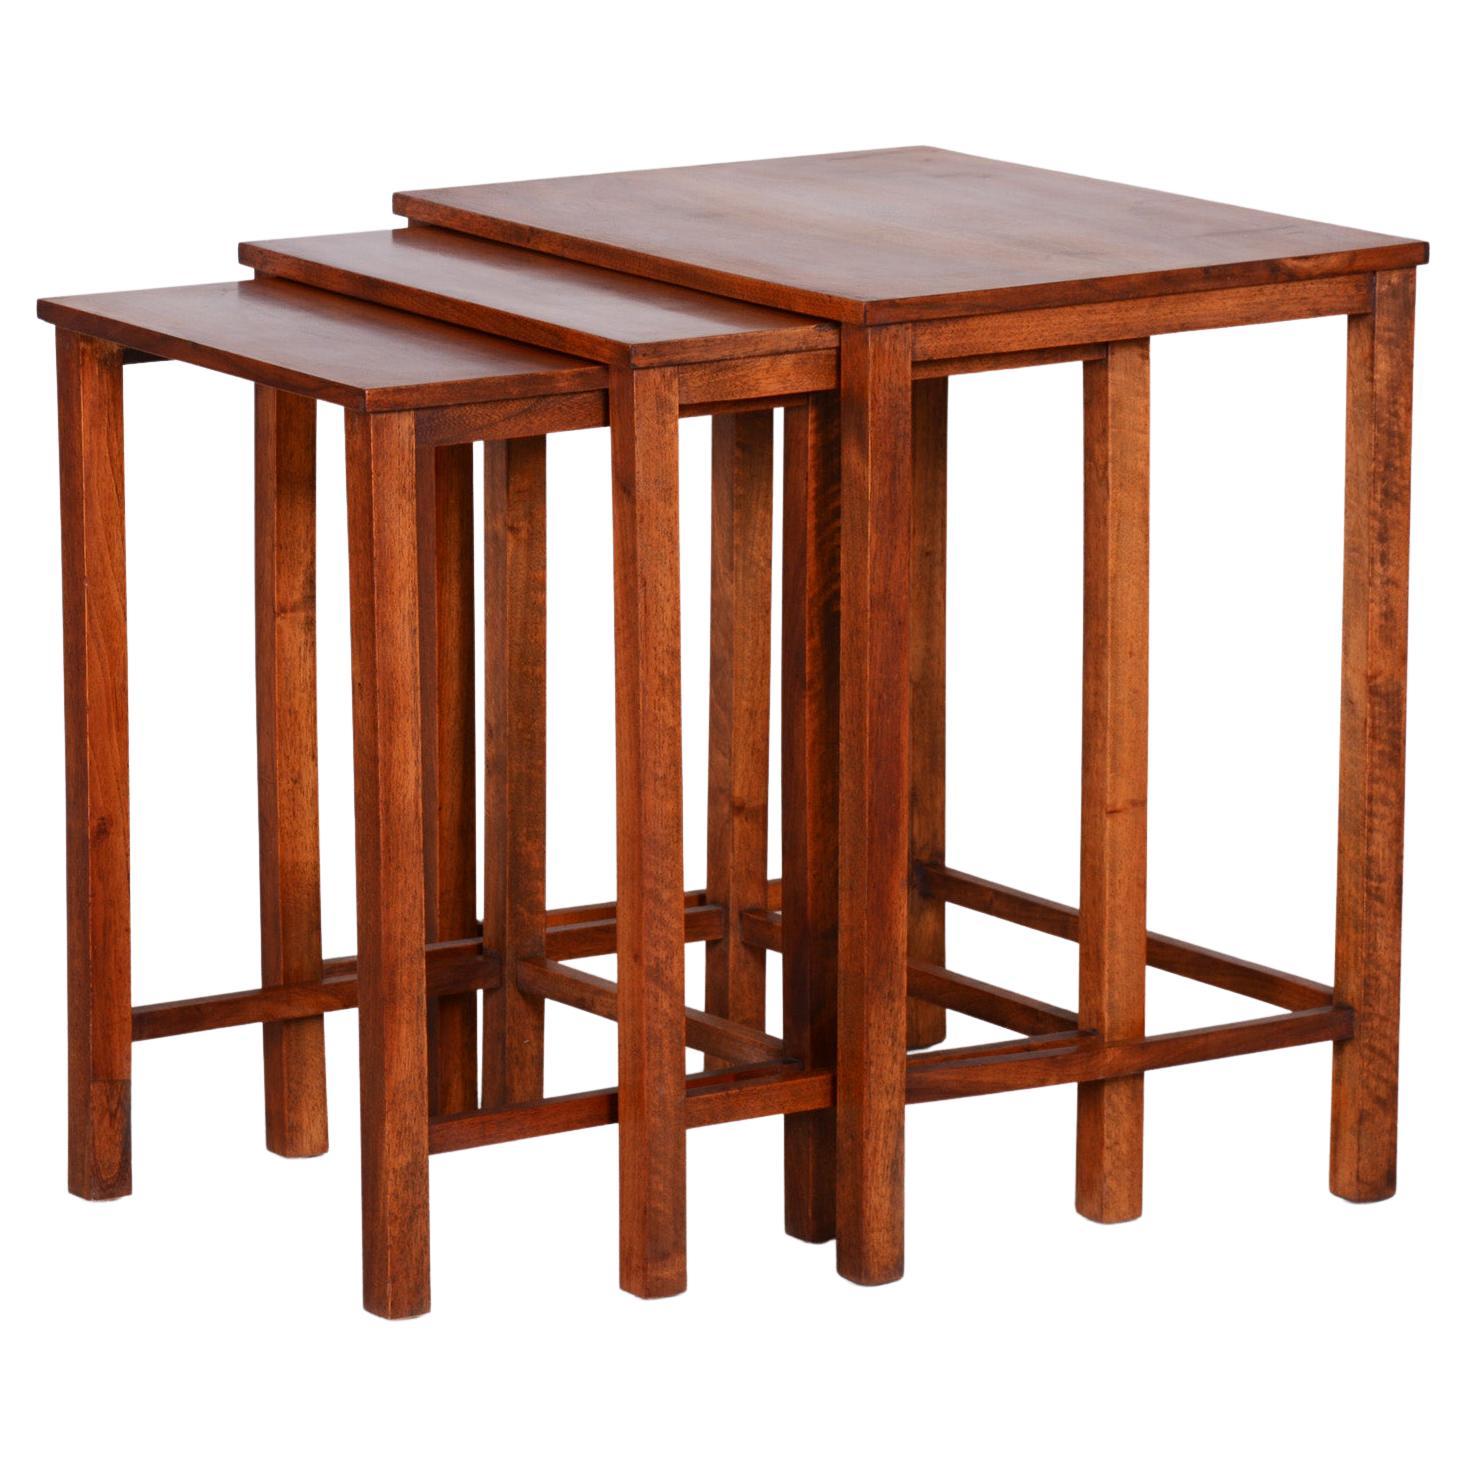 Original Condition Brown Nest Tables Made in the 1930s, Czech For Sale